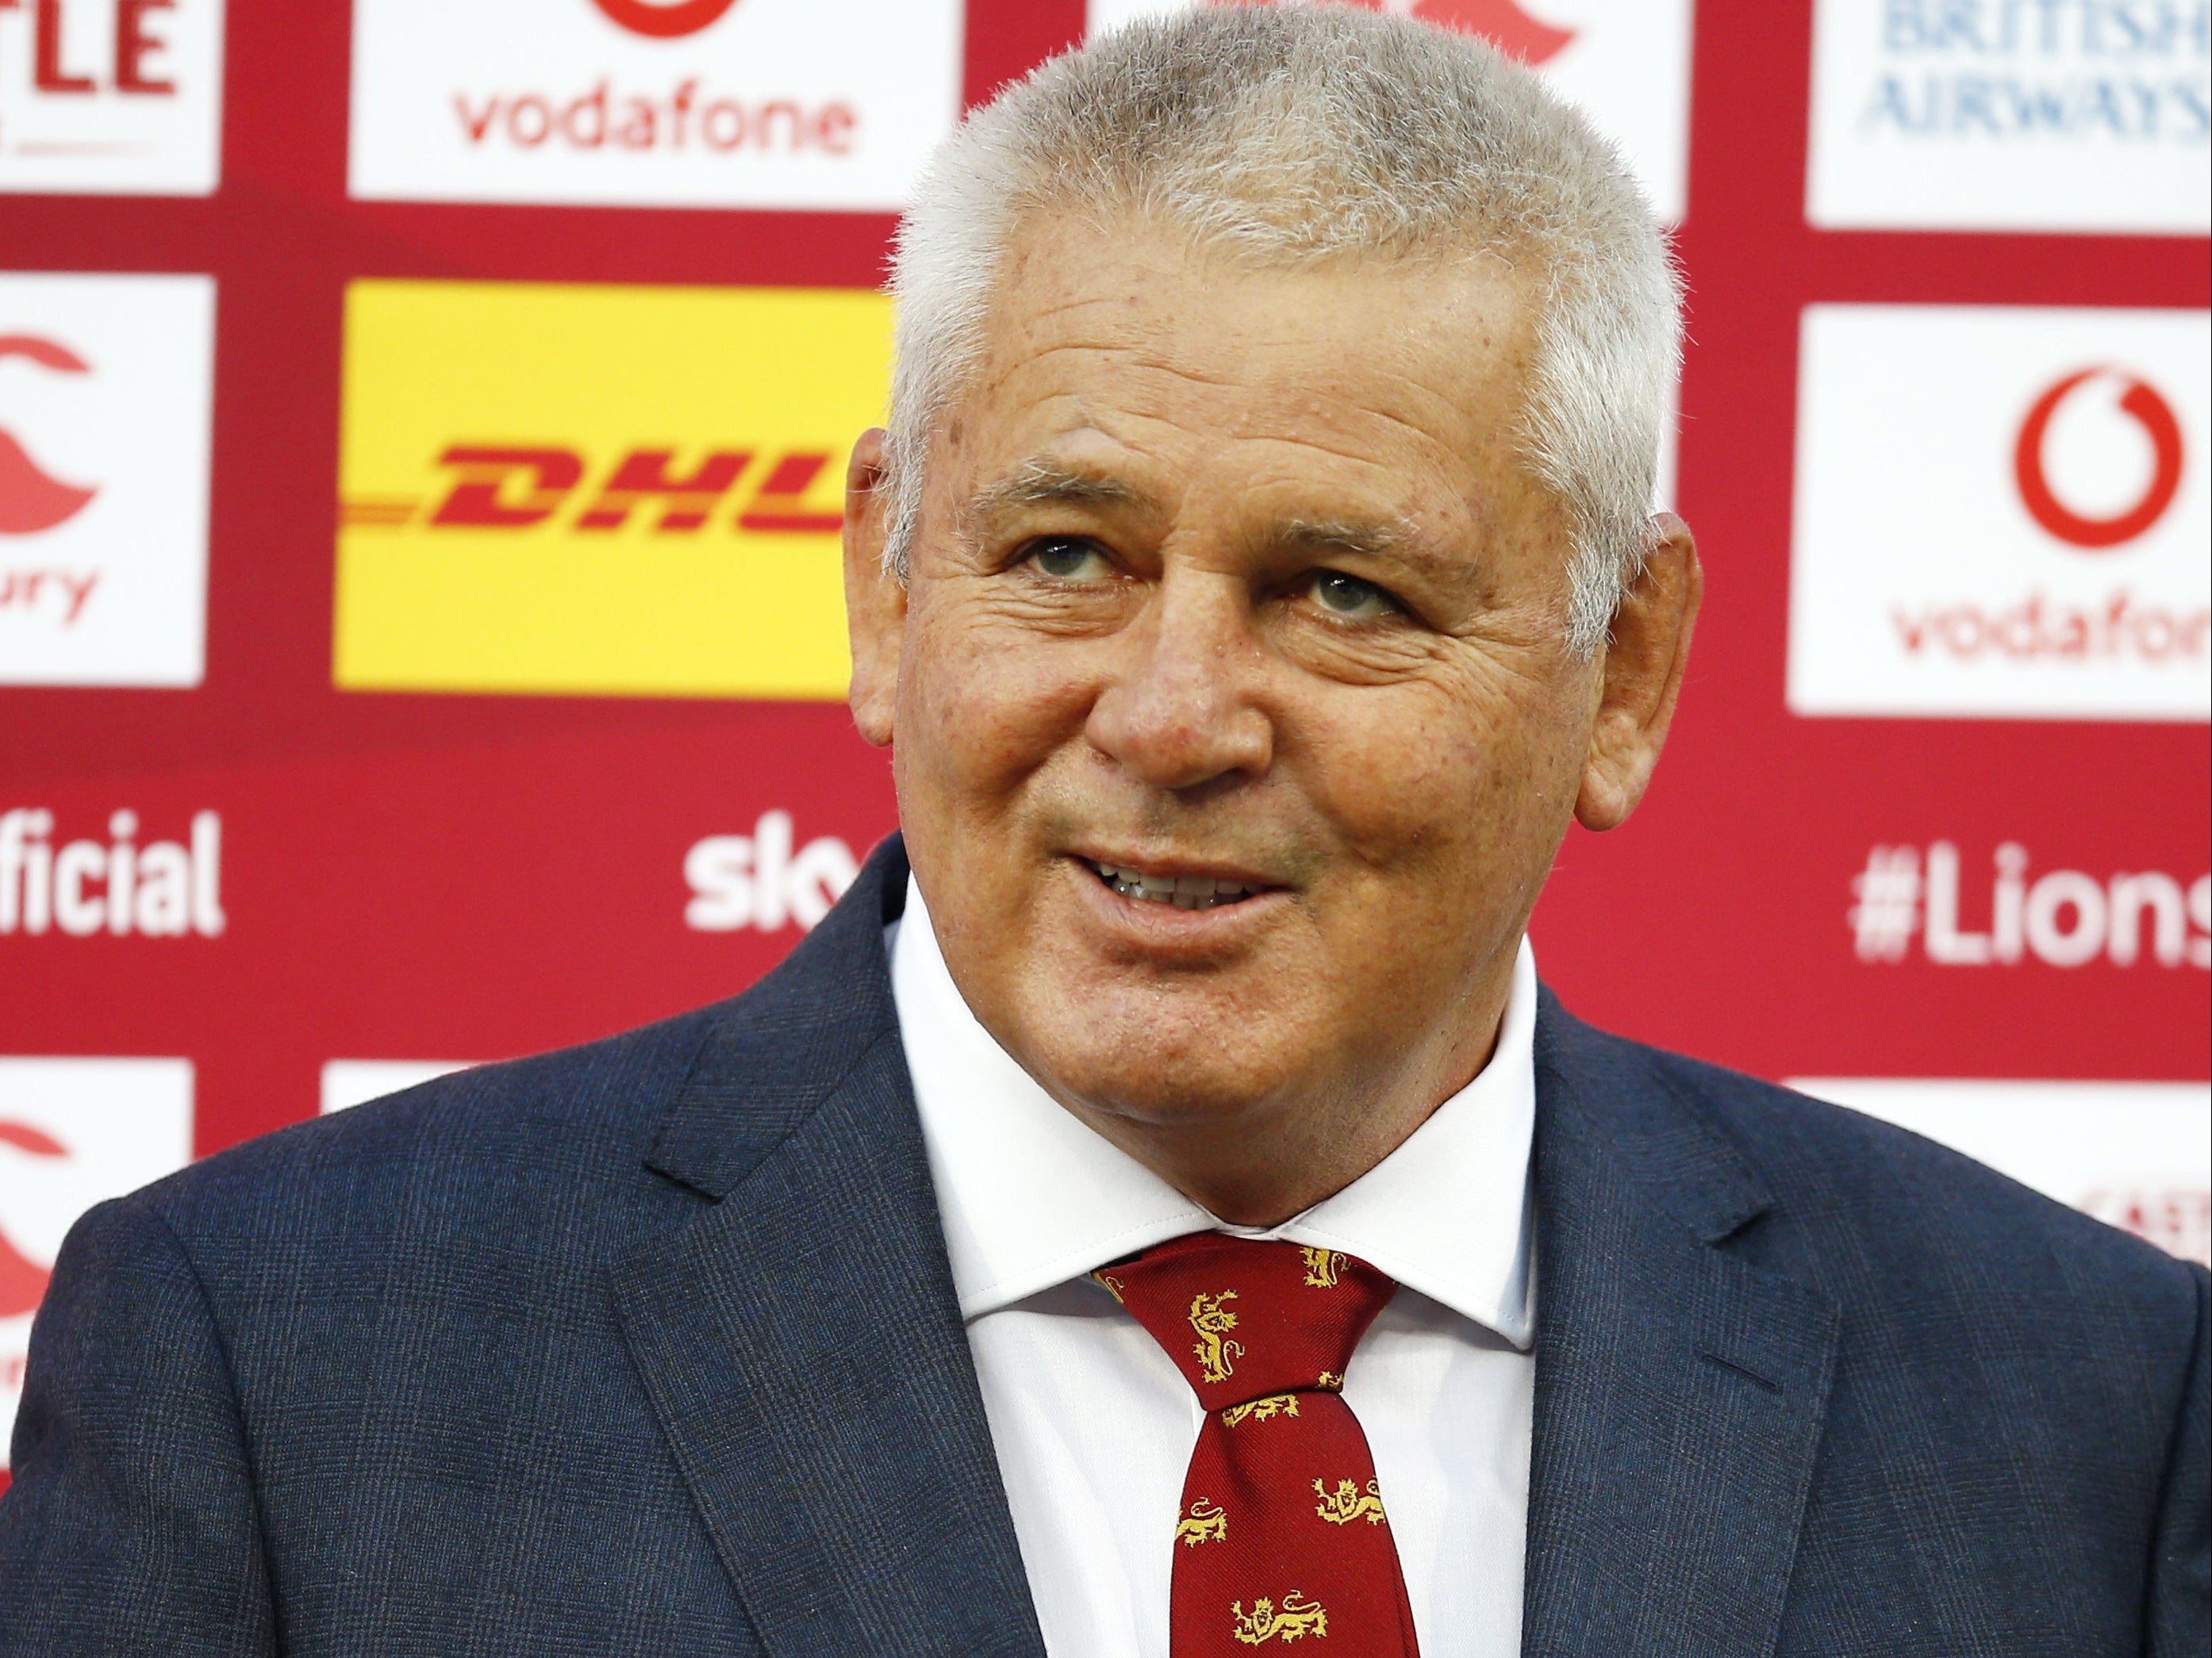 Warren Gatland has begun picking the Lions' test side to face South Africa on Saturday